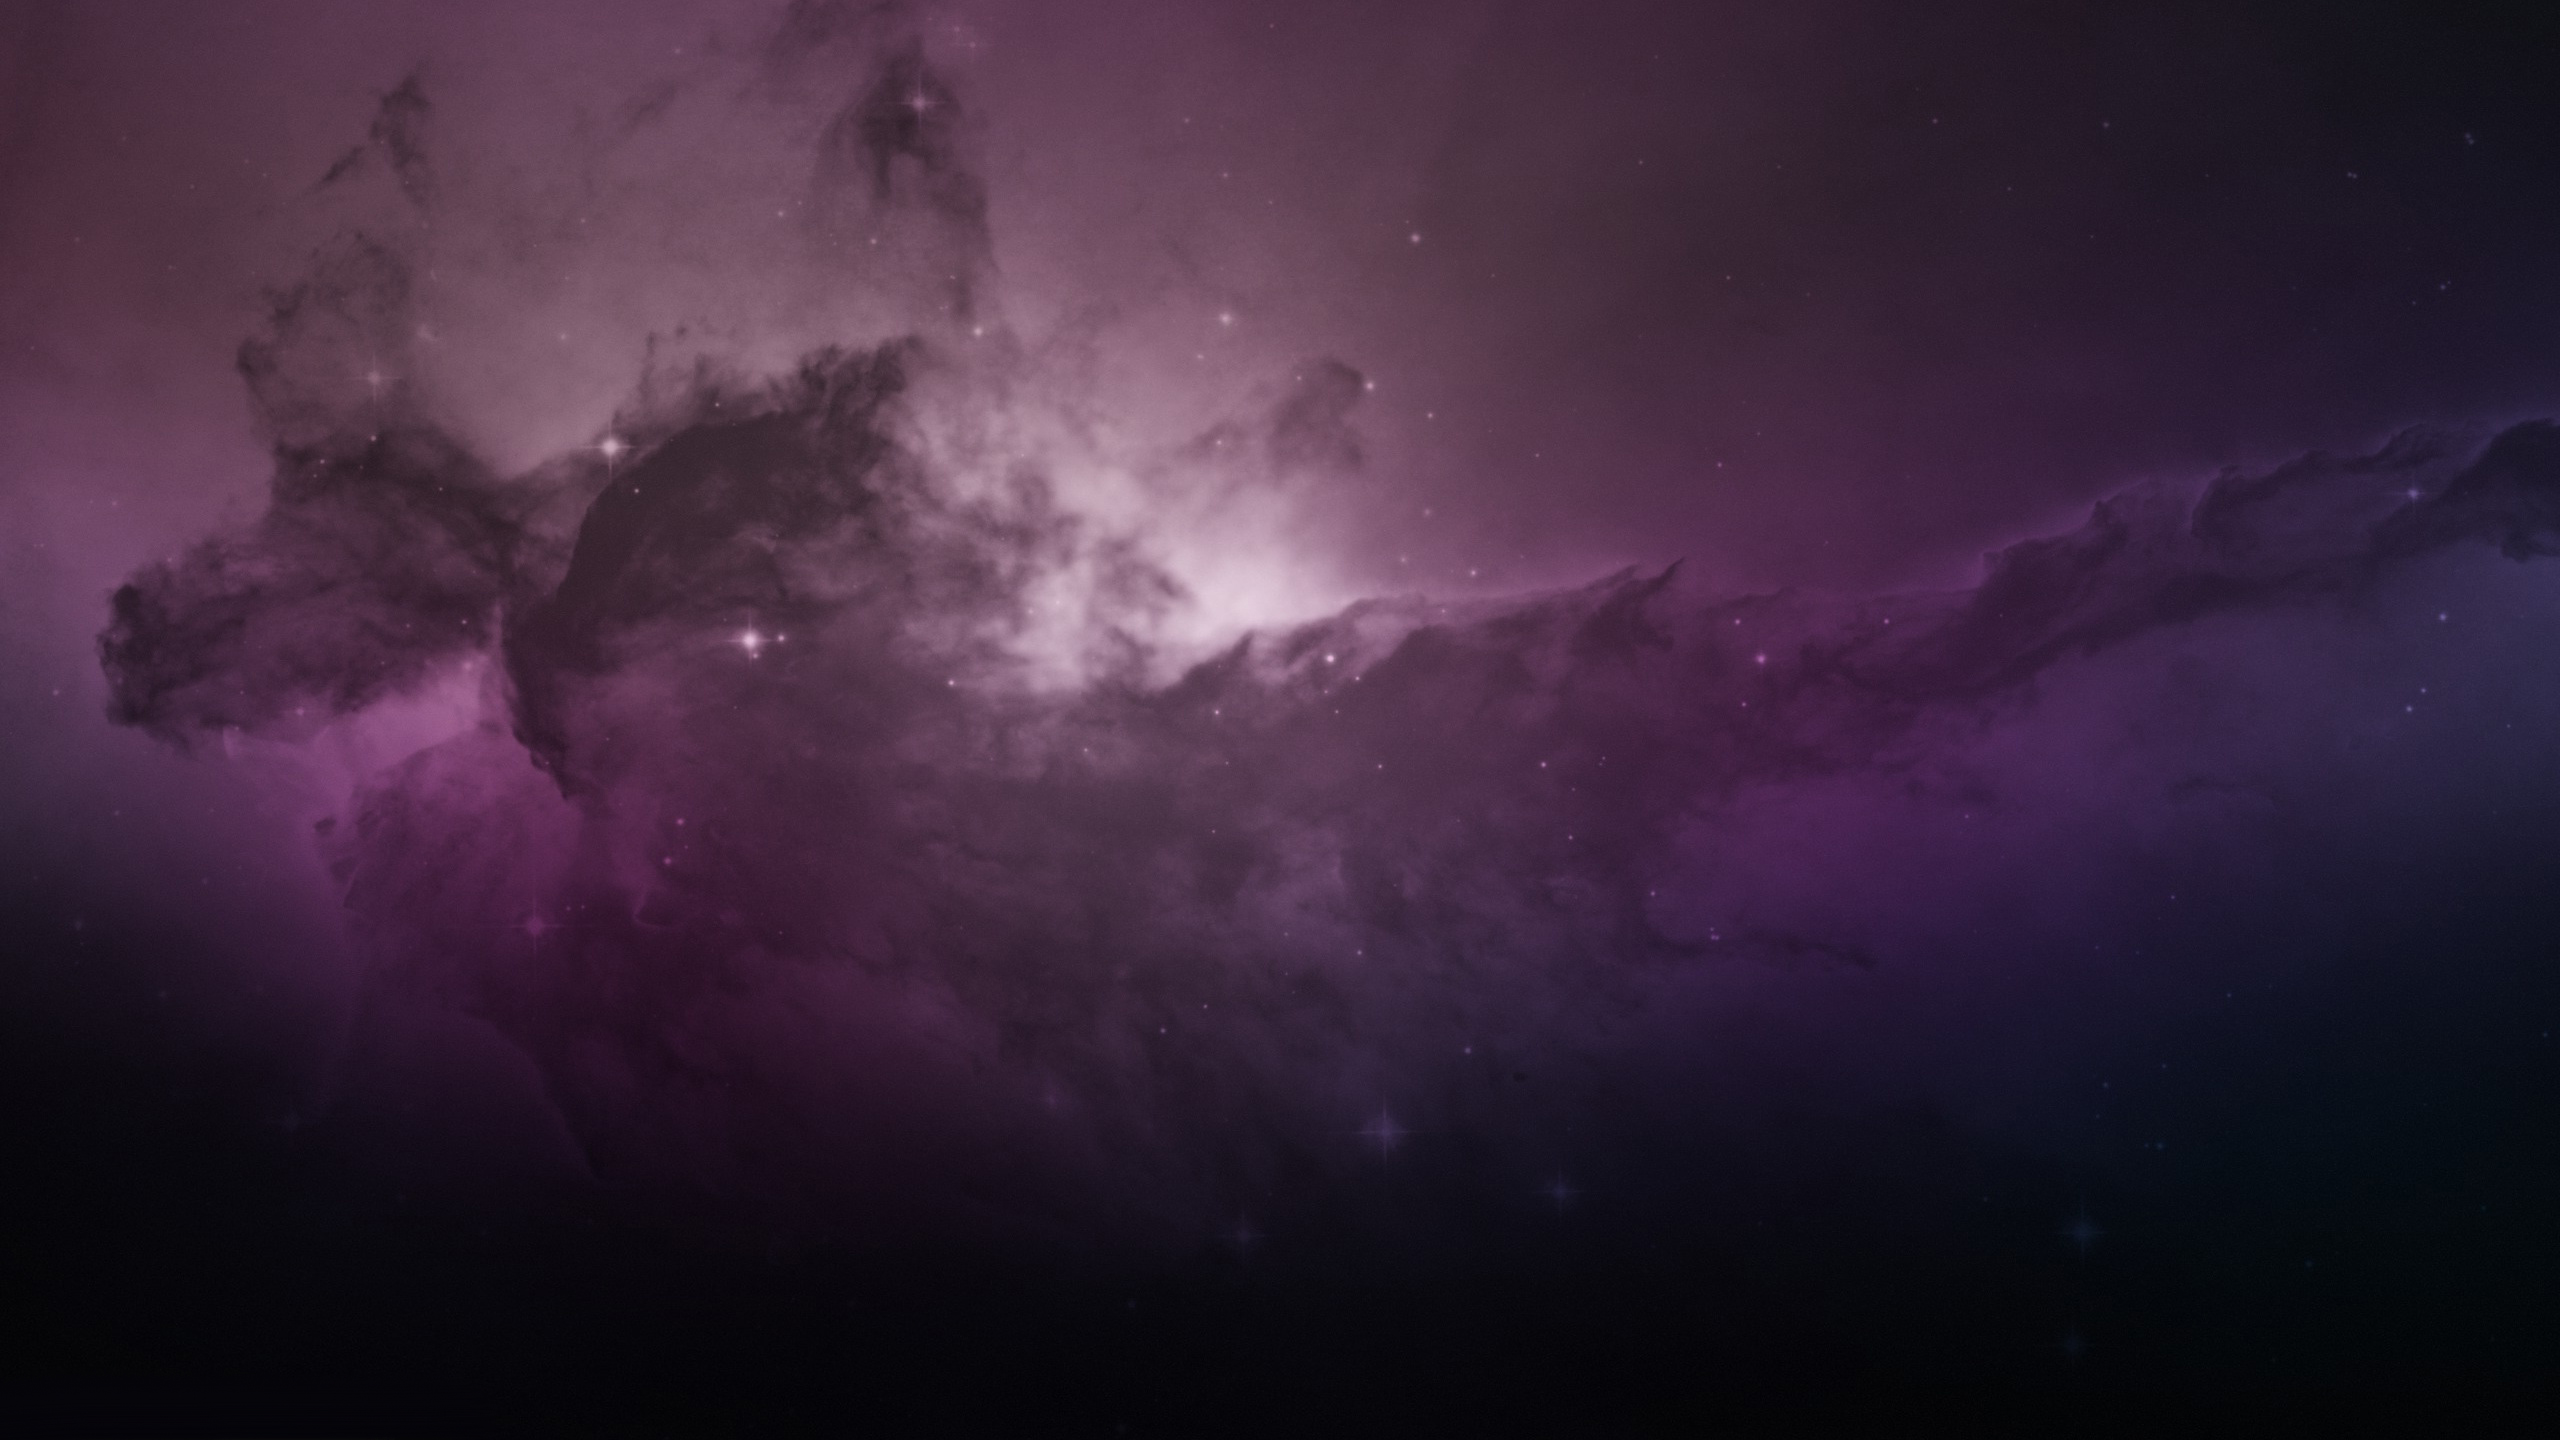 Free Download Wallpaper Nebula Eagle Computer Space Media 2560x1440 2560x1440 For Your Desktop Mobile Tablet Explore 43 2560 X 1440 Galaxy Wallpaper 2560 X 1440 Desktop Wallpaper 1440 X 2560 Phone Wallpapers 1440 X 2560 Vertical Wallpaper